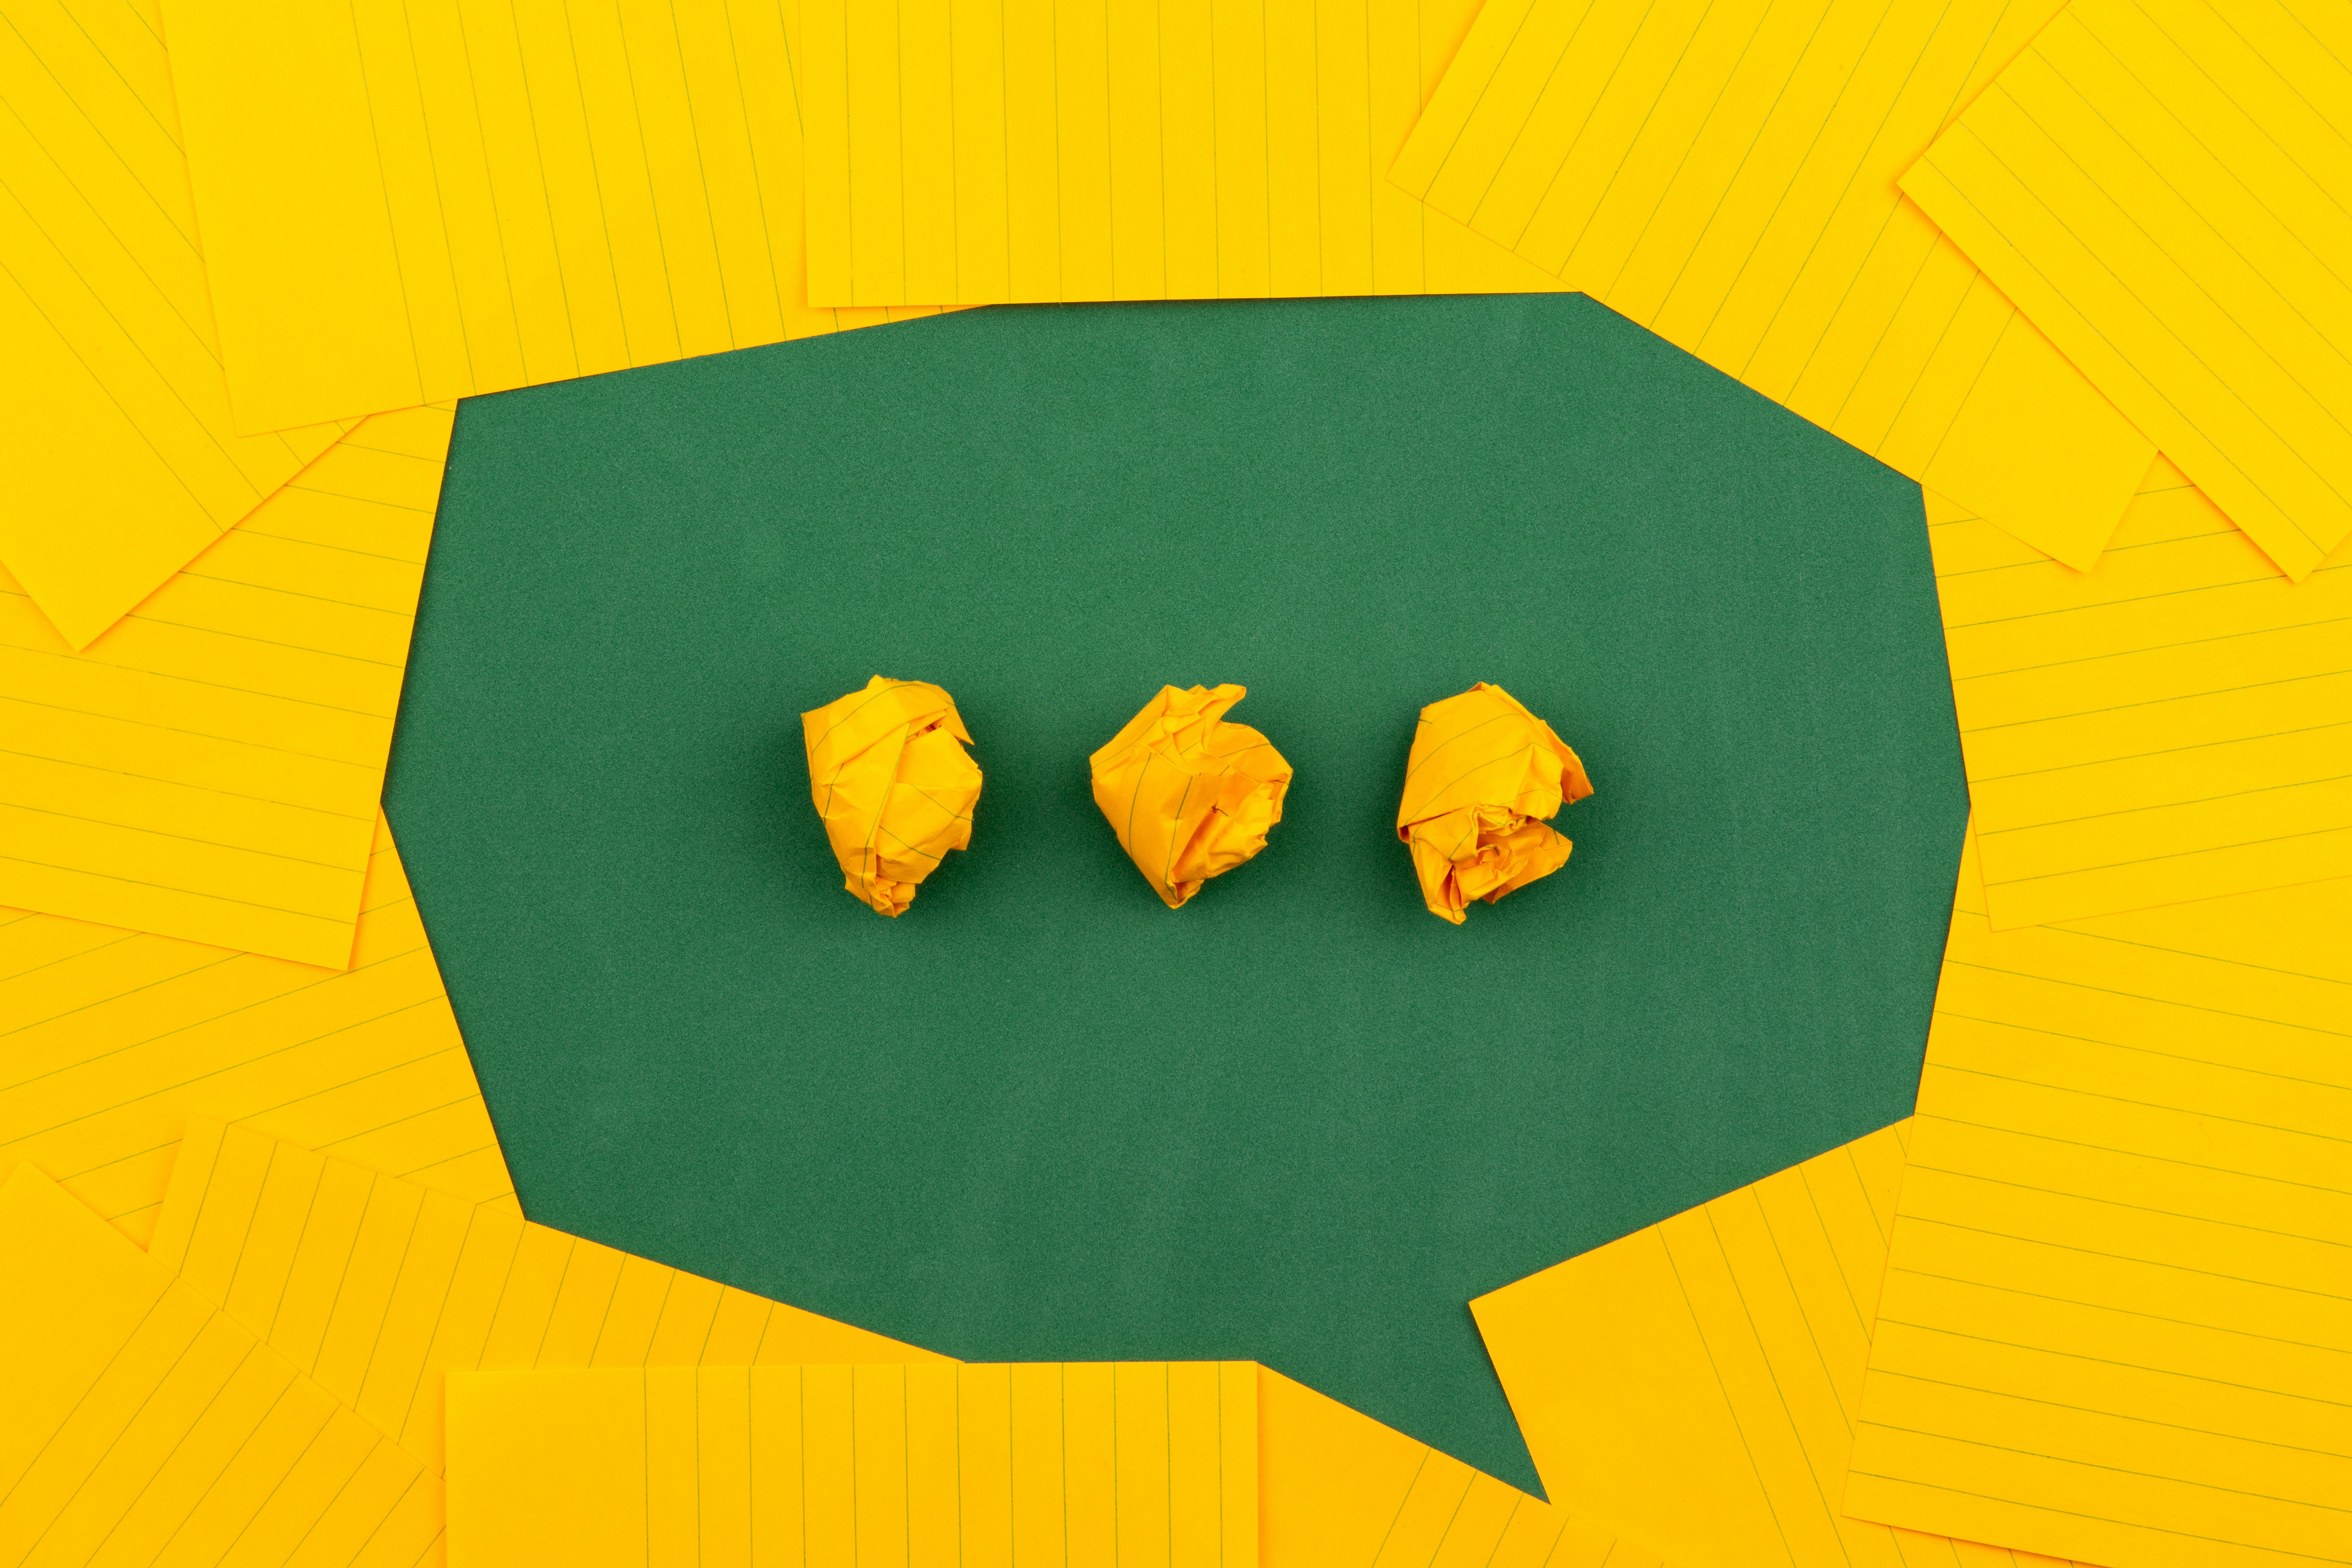 A green speech bubble on a yellow background